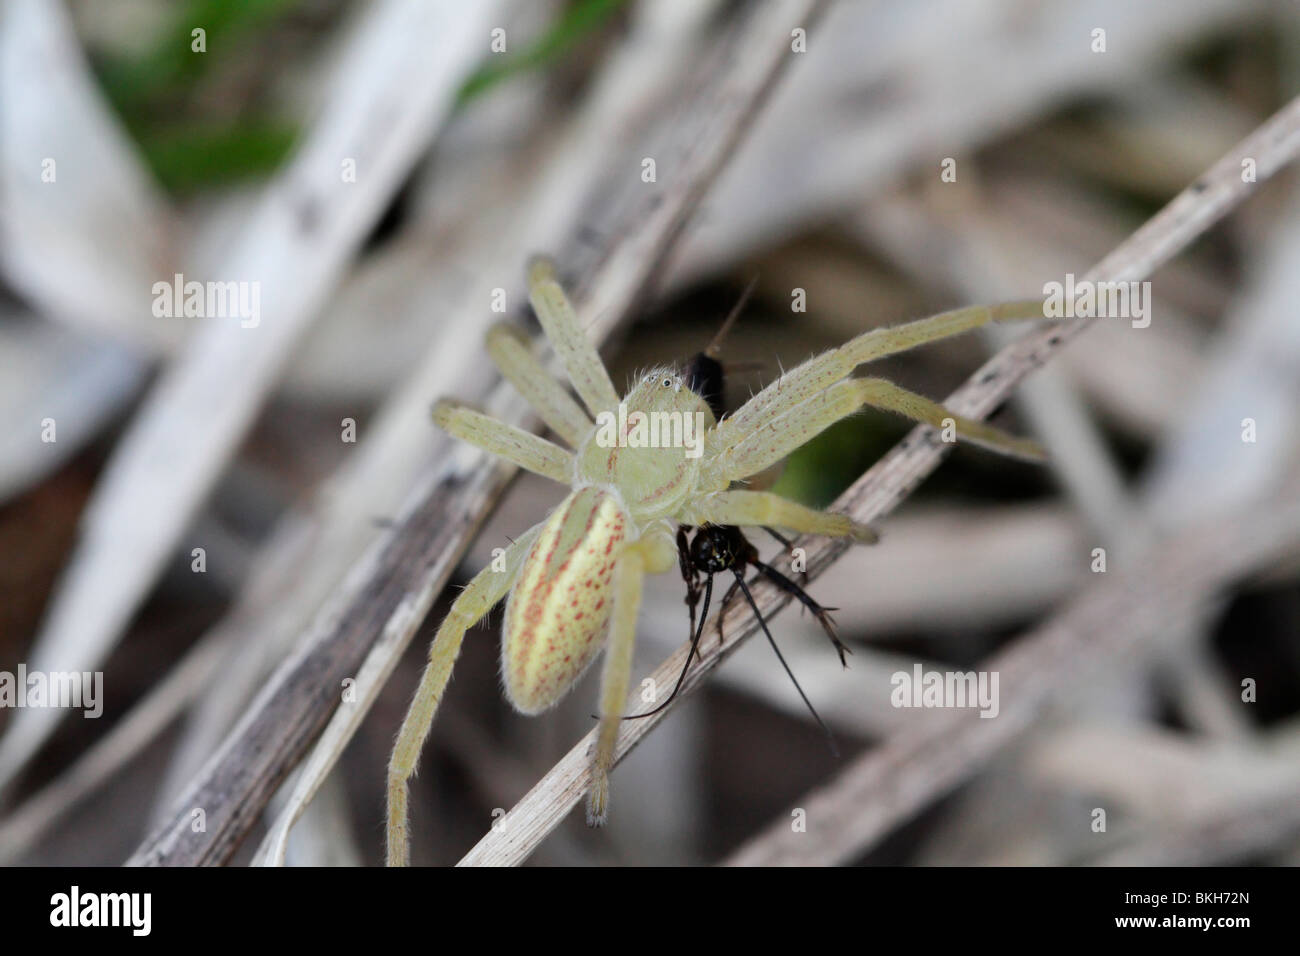 Micrommata virescens, the green huntsman spider, with prey Stock Photo